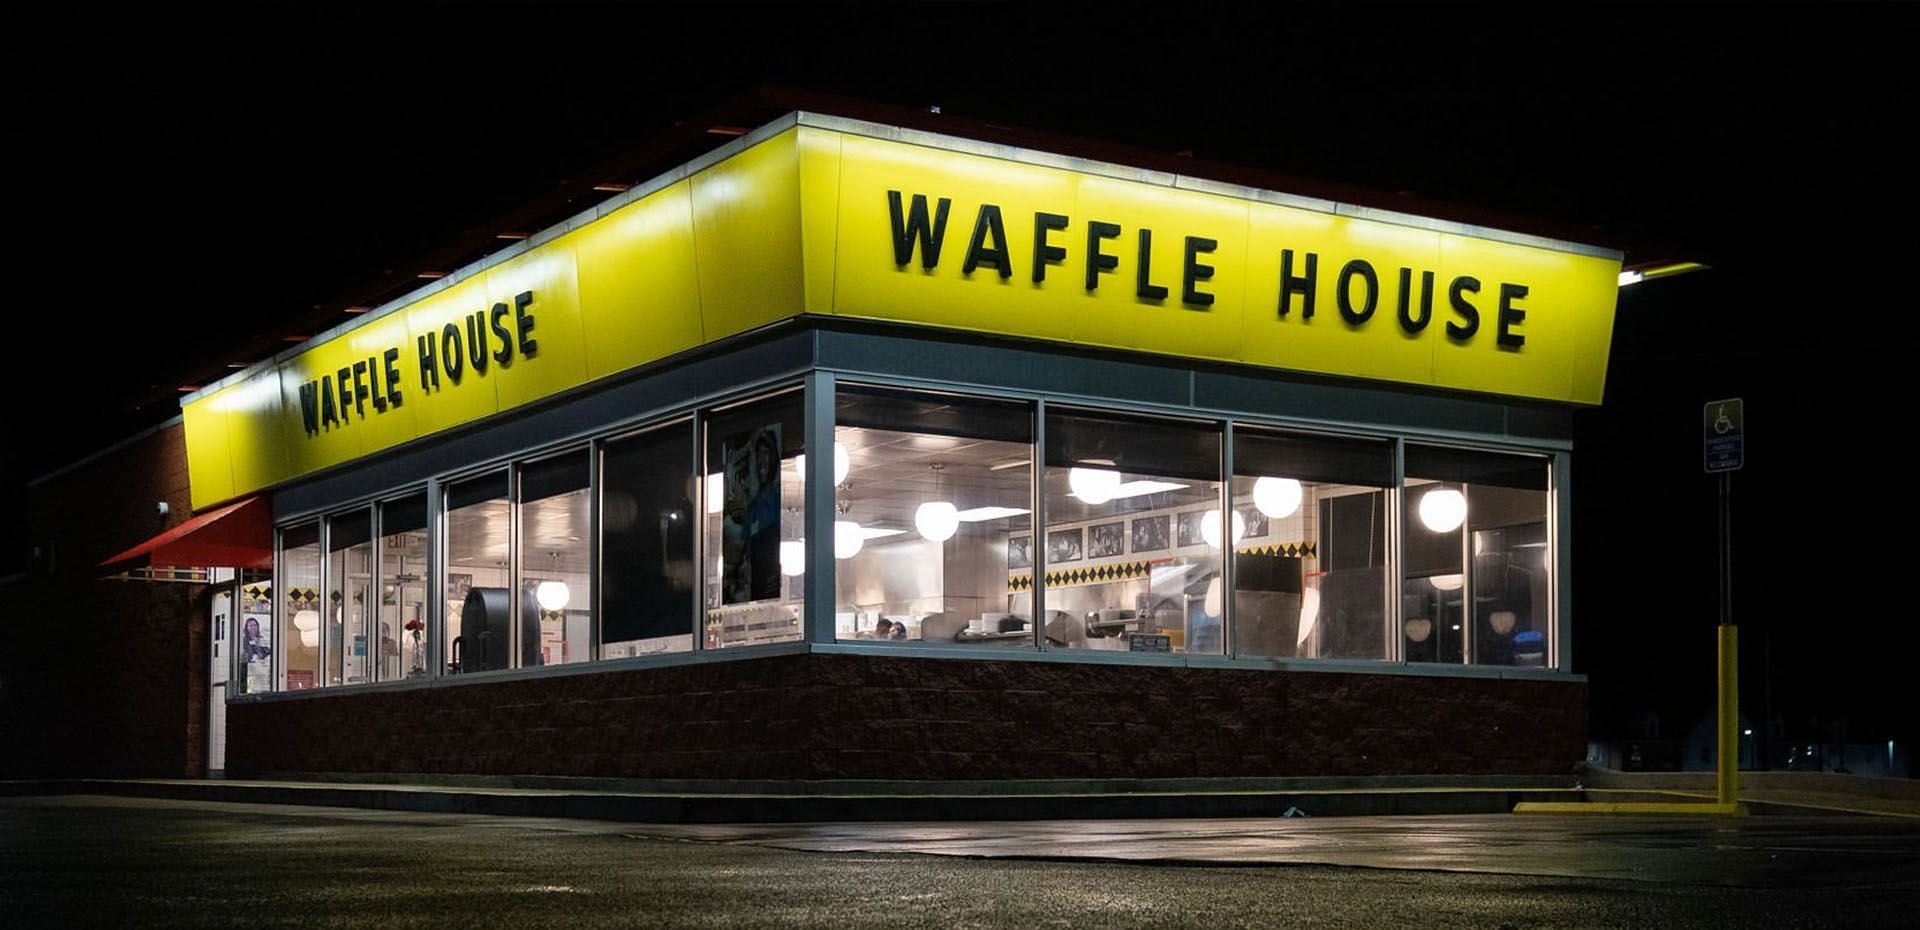 Typical layout of a Waffle House restaurant (Image via Getty Images)